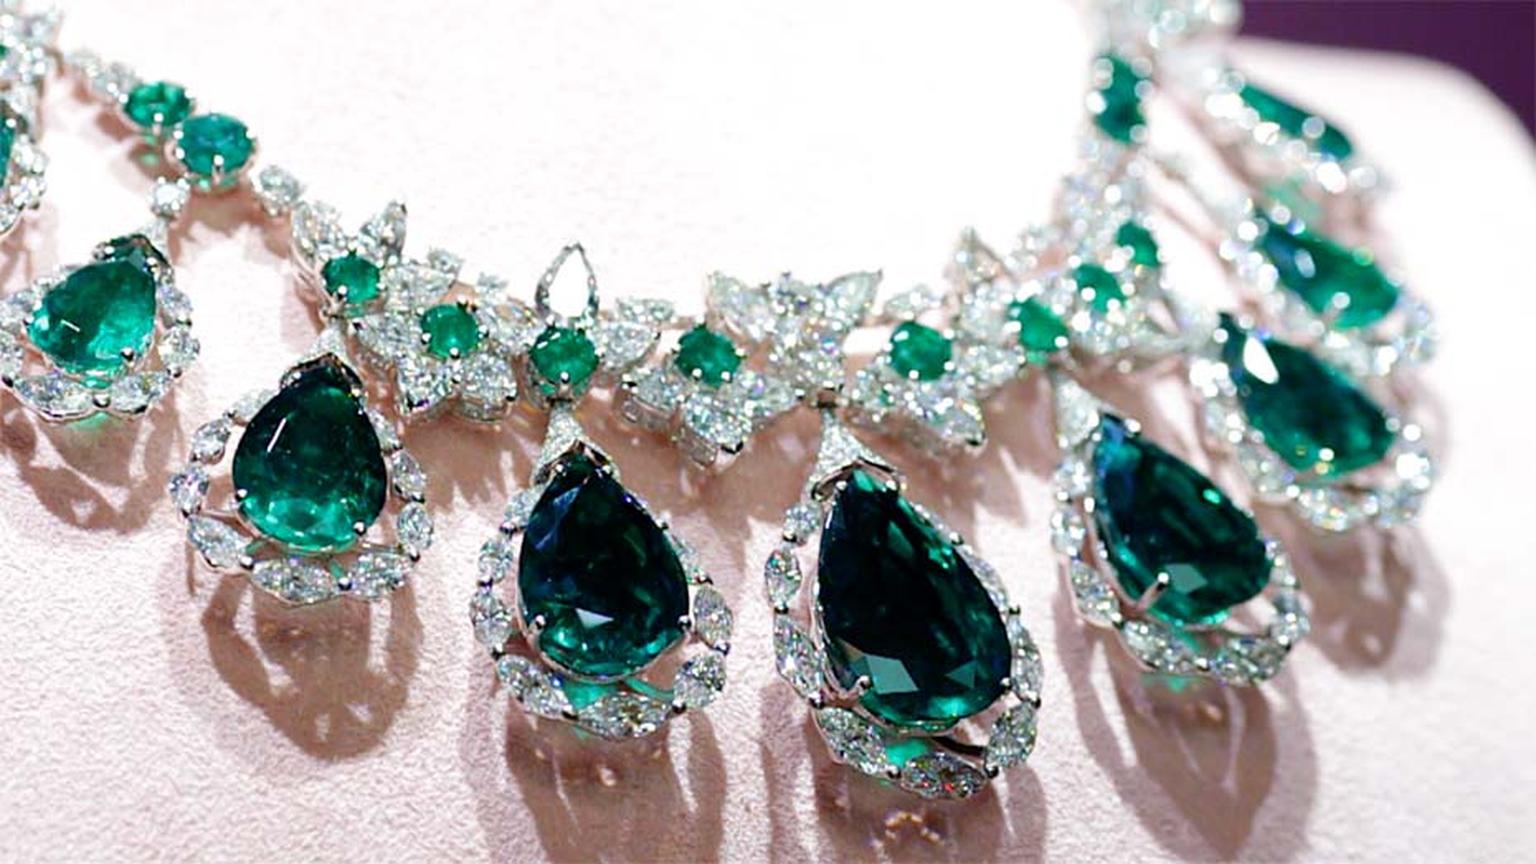 Jeremy Morris' favourite coloured stone is the emerald, his daughter Phoebe explains, which becomes quickly evident by his array of sparkling emerald pieces seen throughout the David Morris boutique.